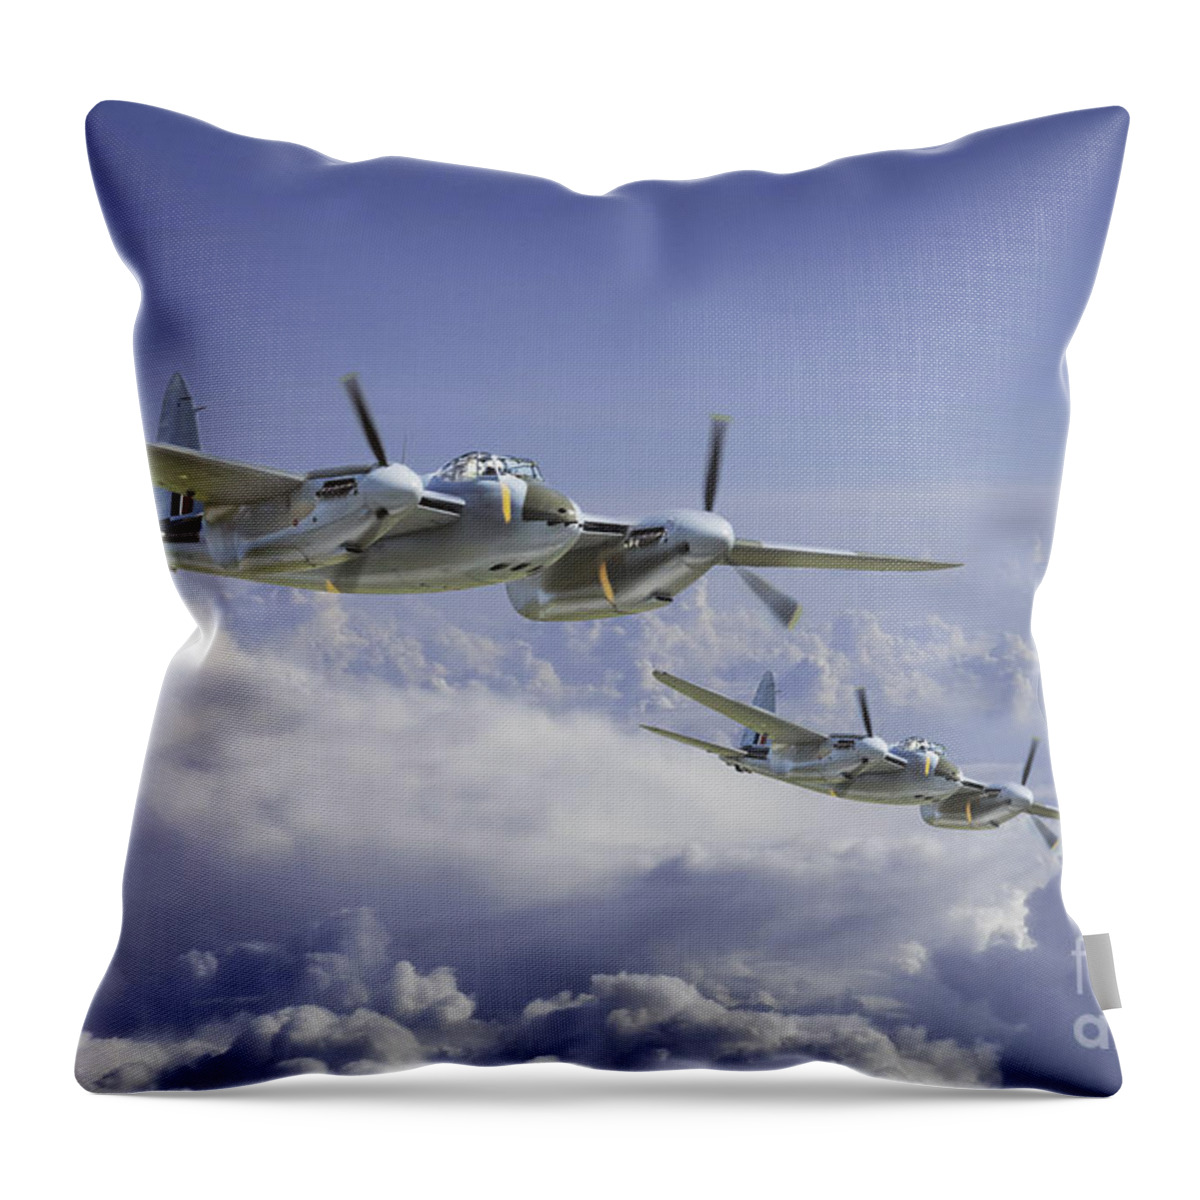 De Havilland Mosquito Throw Pillow featuring the digital art Mosquito Patrol by Airpower Art